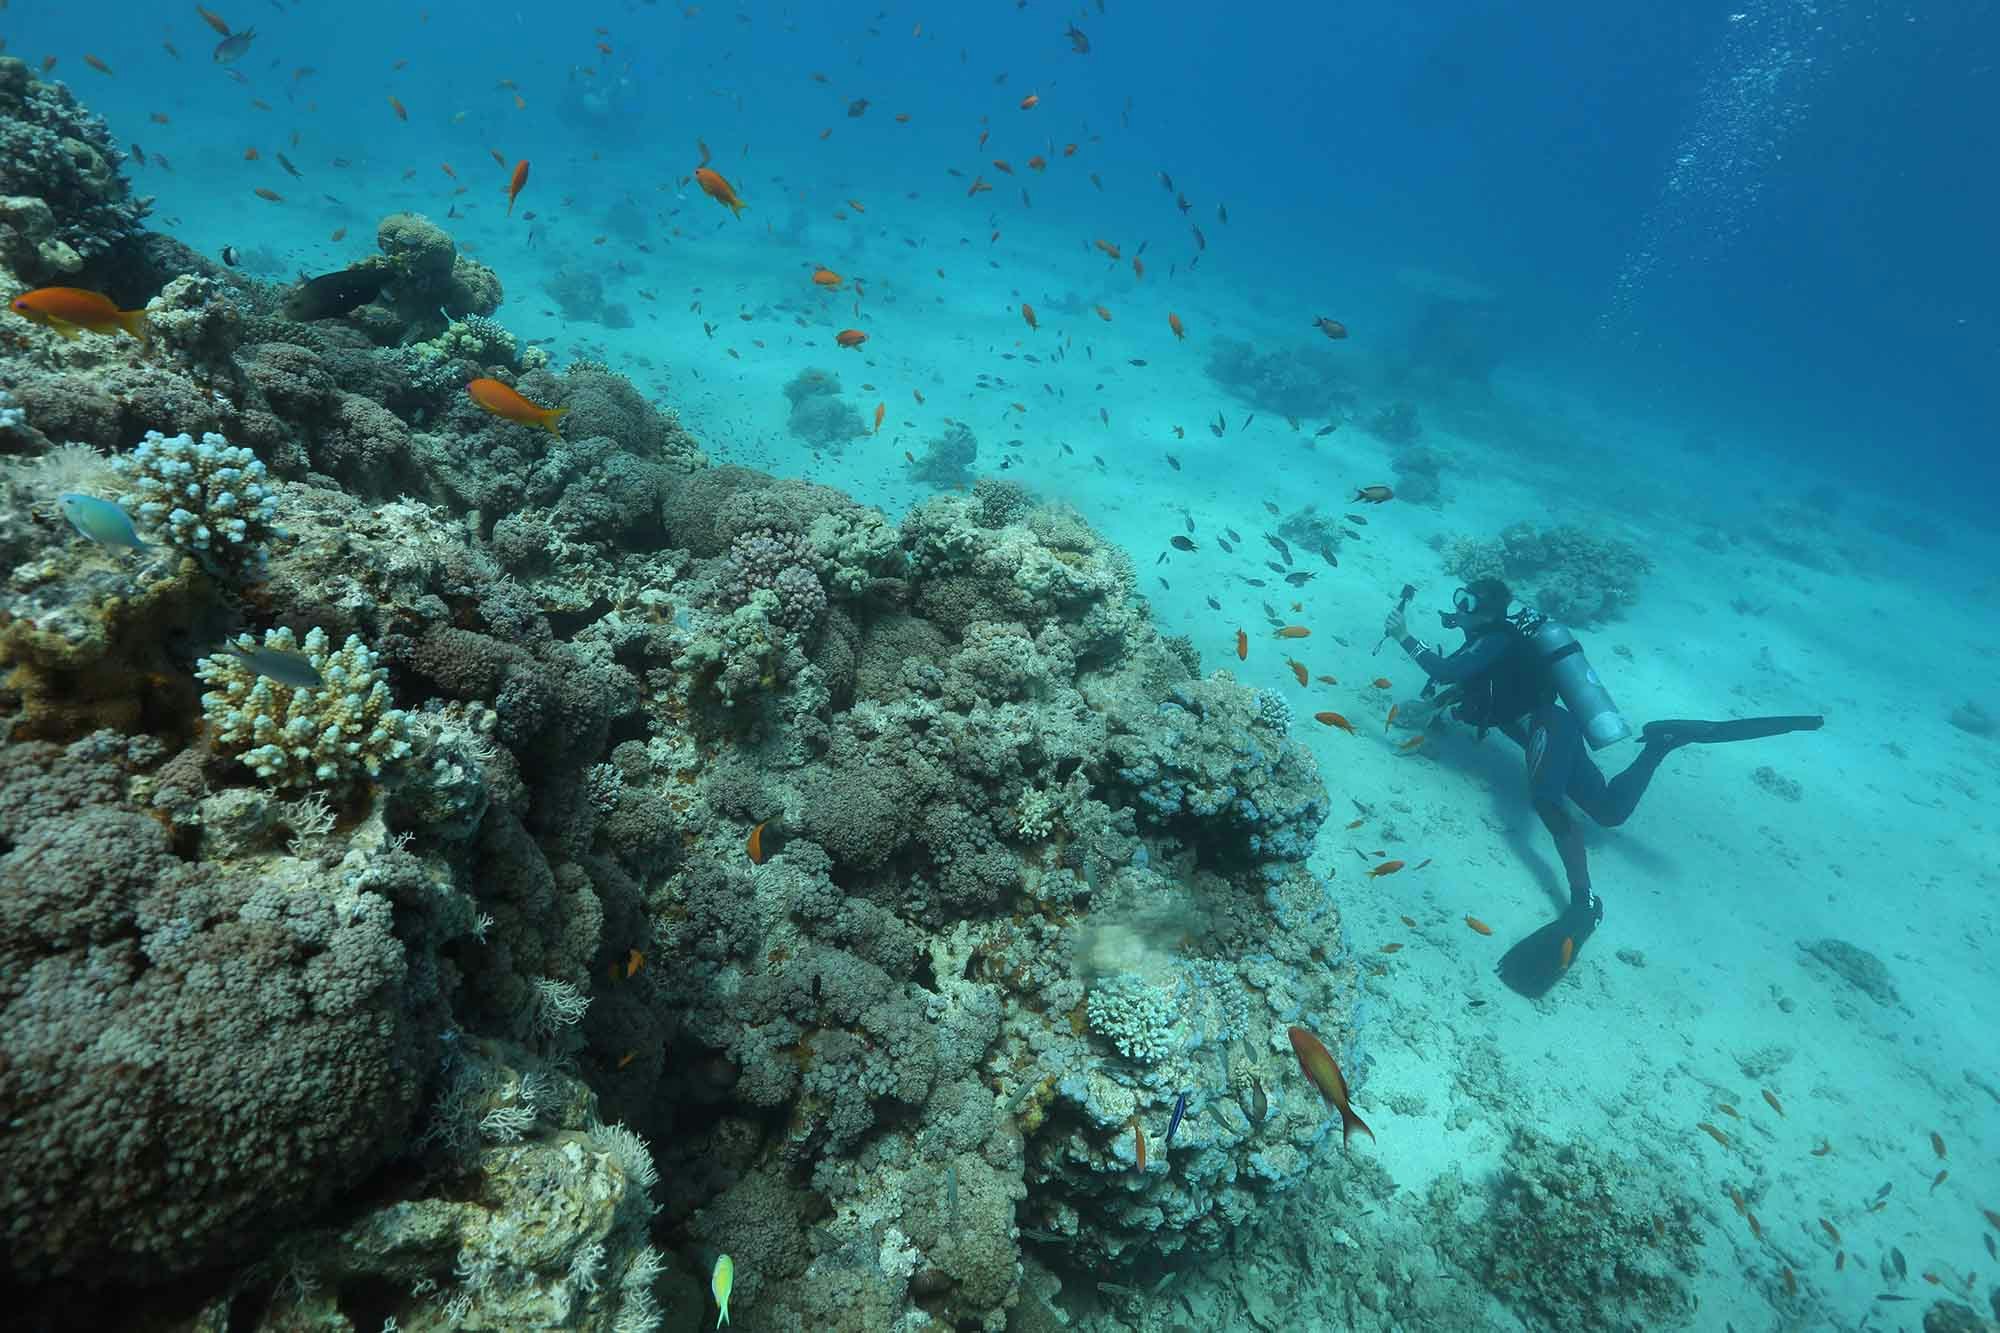 Scientists encouraged by Red Sea coral reef findings